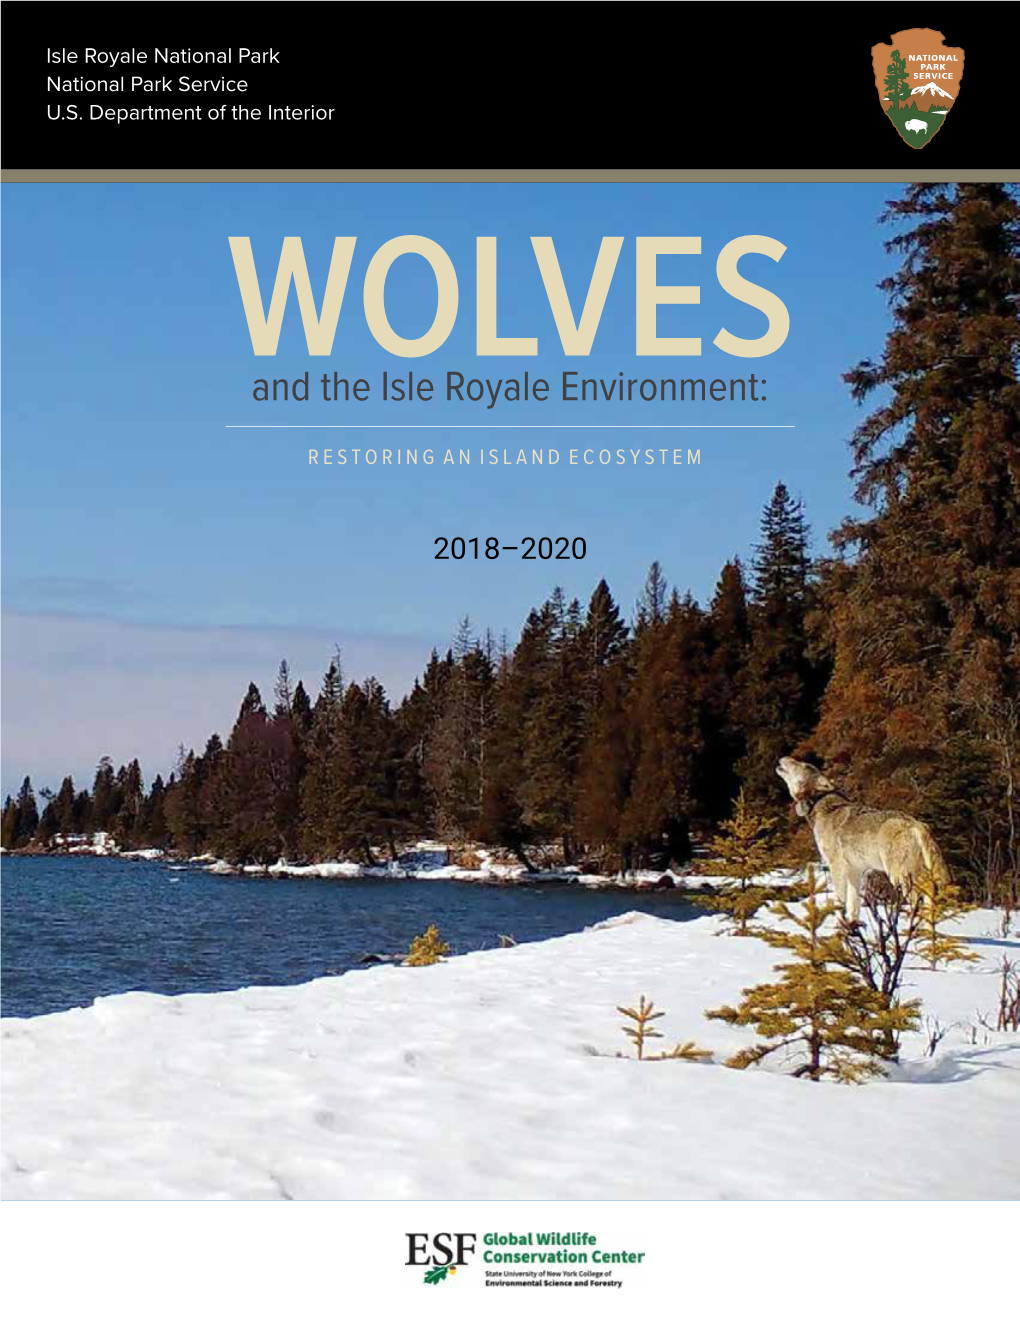 Wolves and the Isle Royale Environment: Restoring an Island Ecosystem 2018-2020